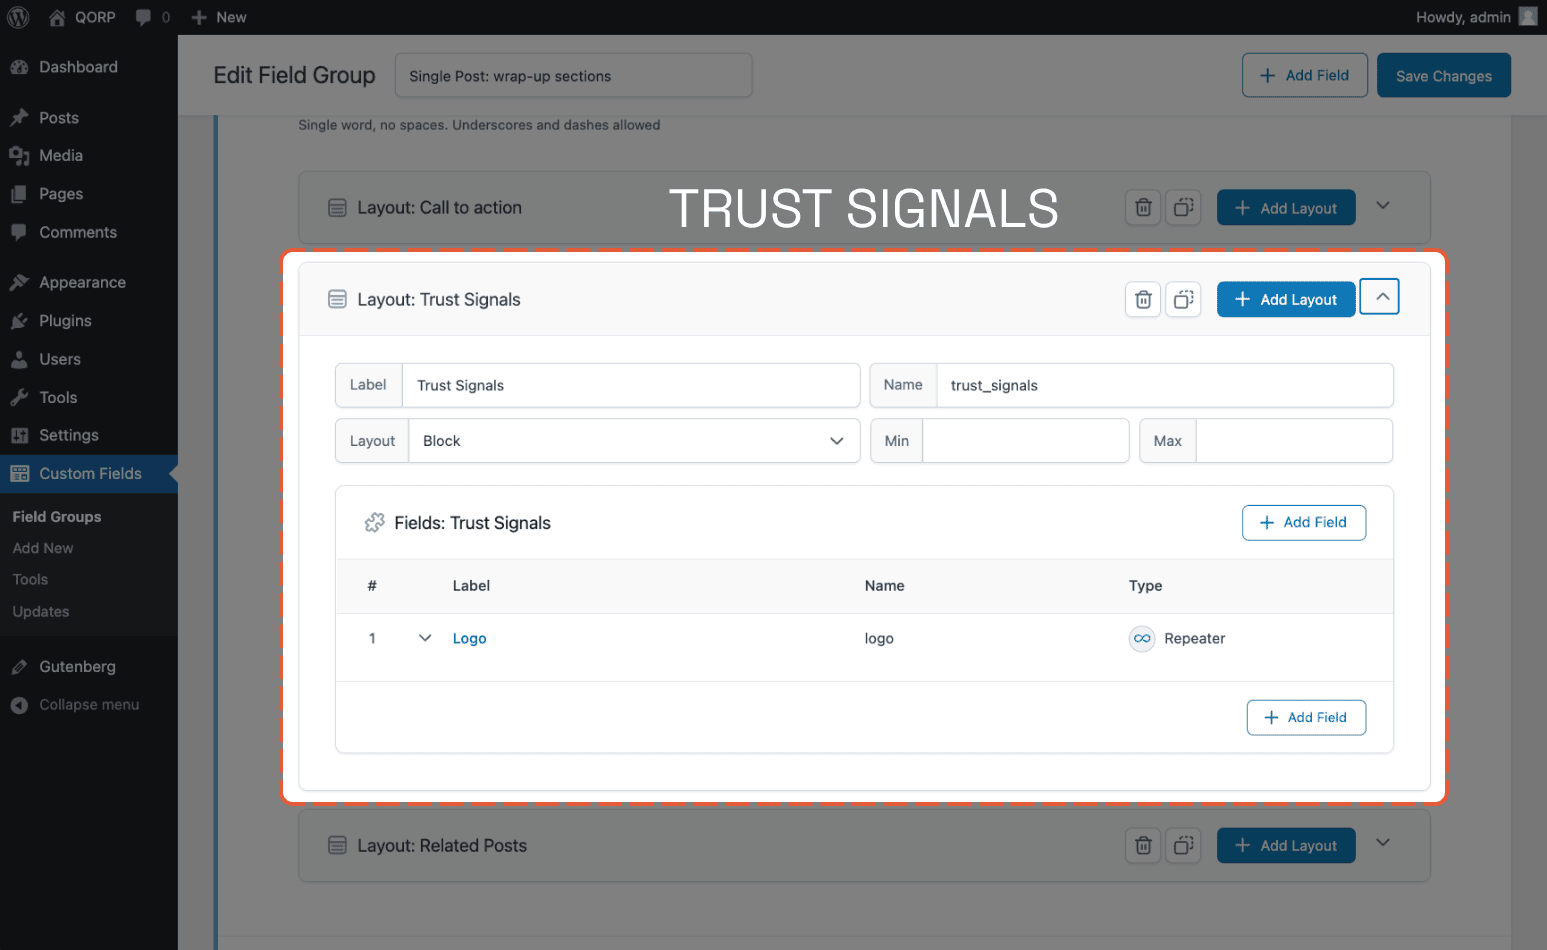 Flexible Content subfields for the Trust Signals section, which is used to display affiliated company logos.